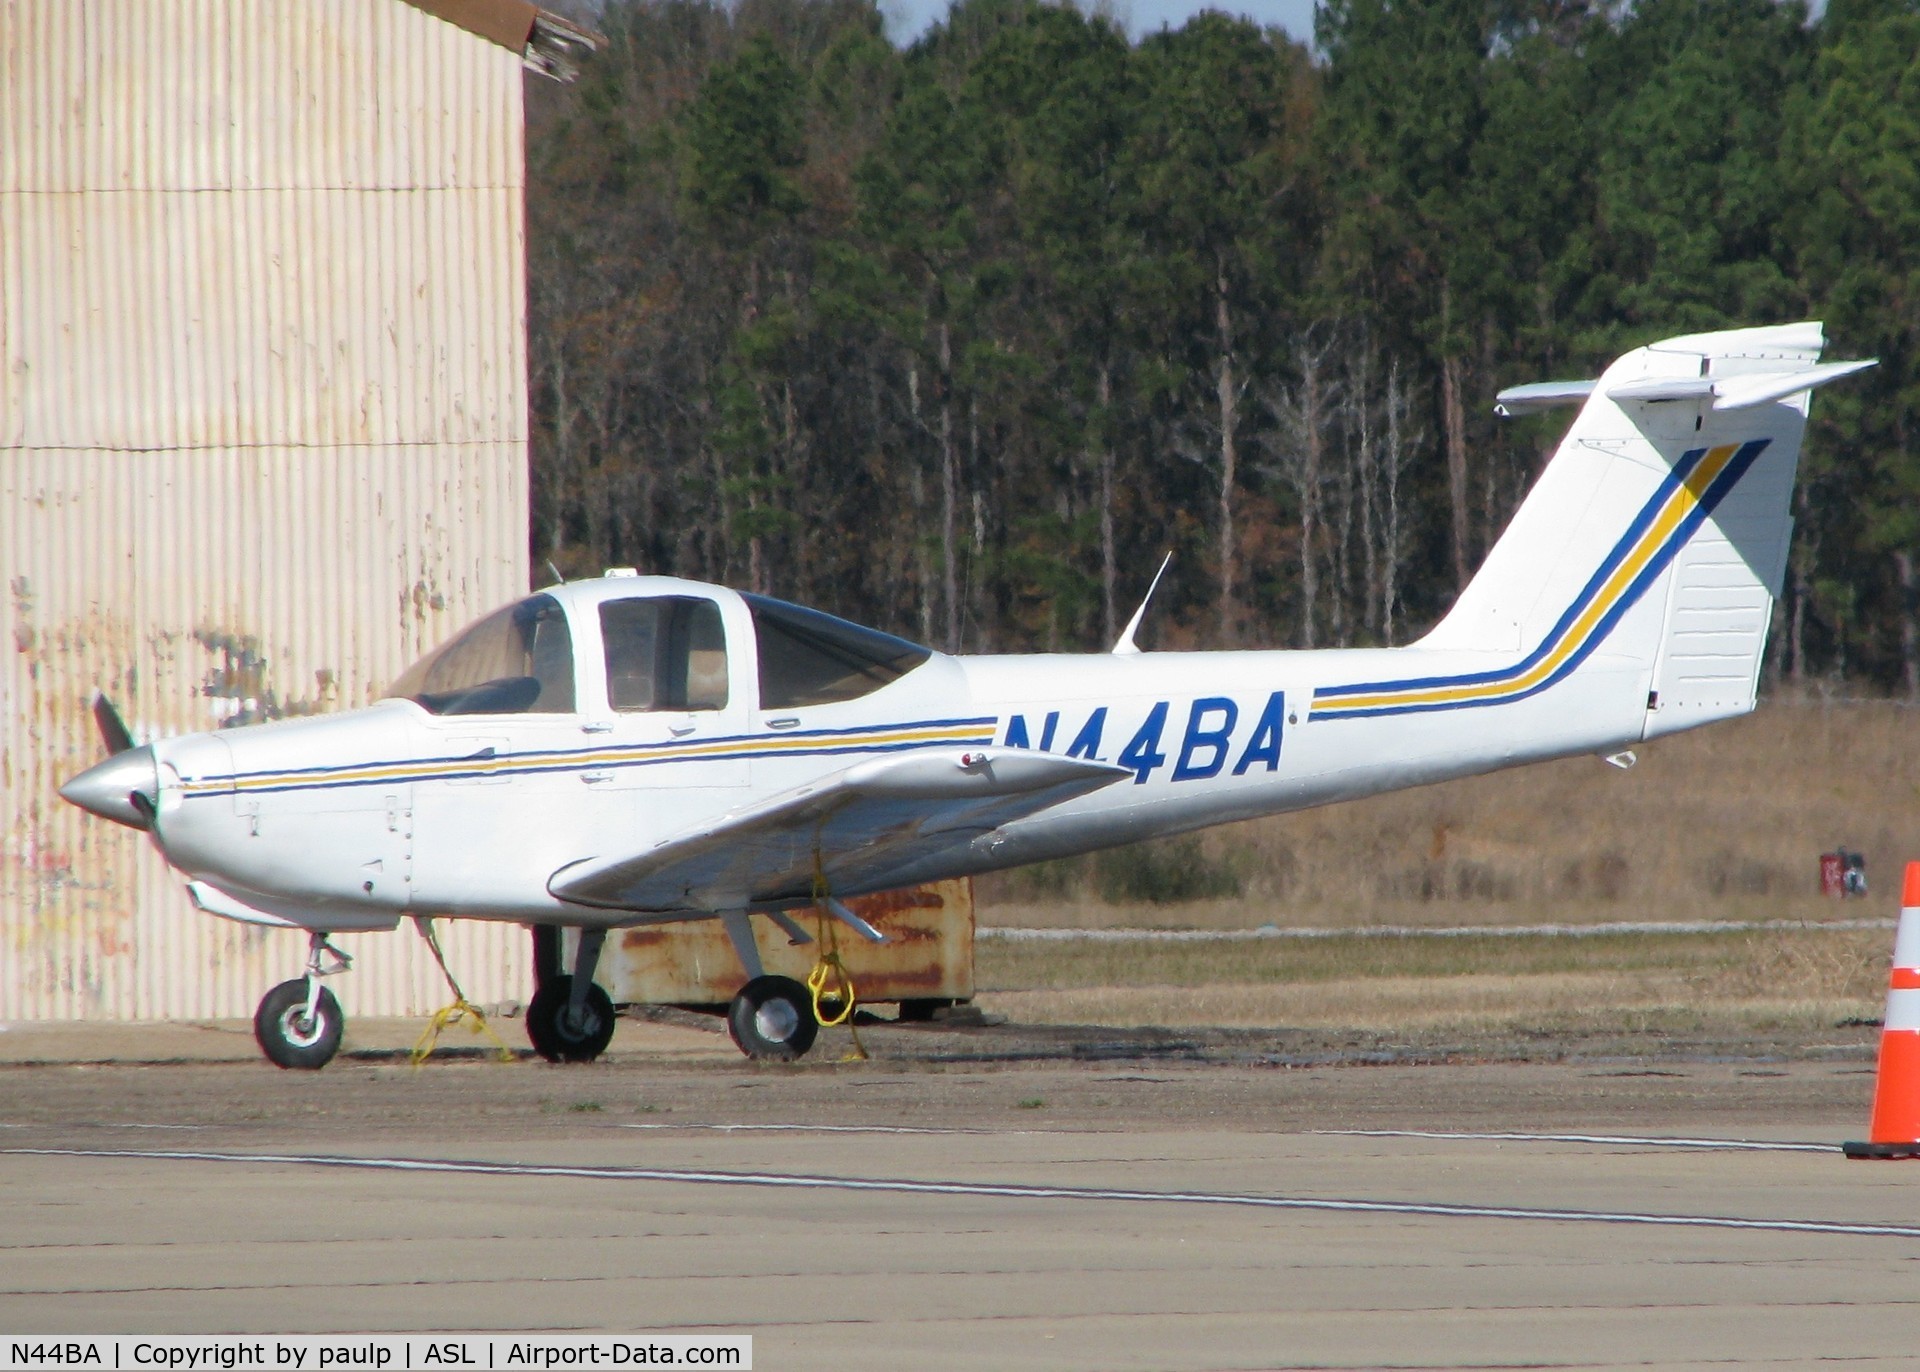 N44BA, 1979 Piper PA-38-112 Tomahawk C/N 38-79A0442, Parked at the Marshall/Harrison County Texas airport.